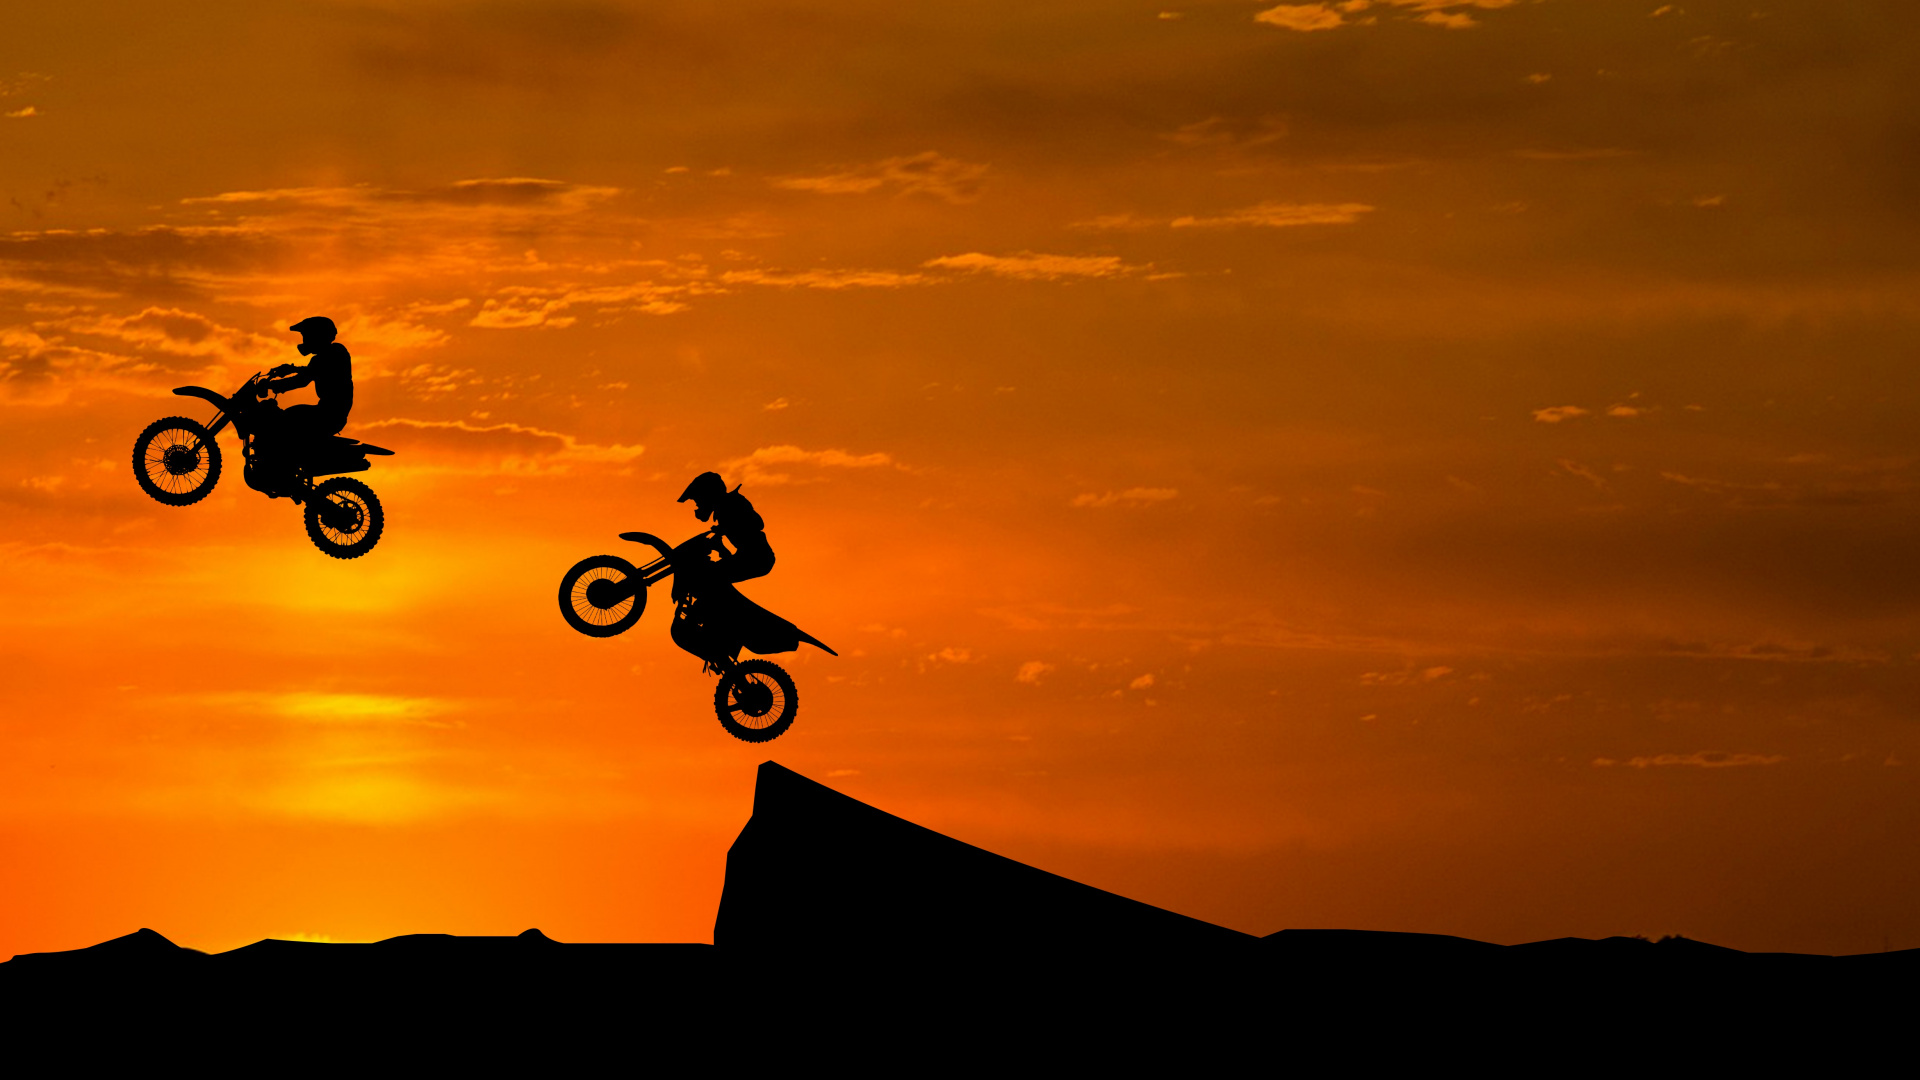 Silhouette of Man Riding Bicycle on Mountain During Sunset. Wallpaper in 1920x1080 Resolution